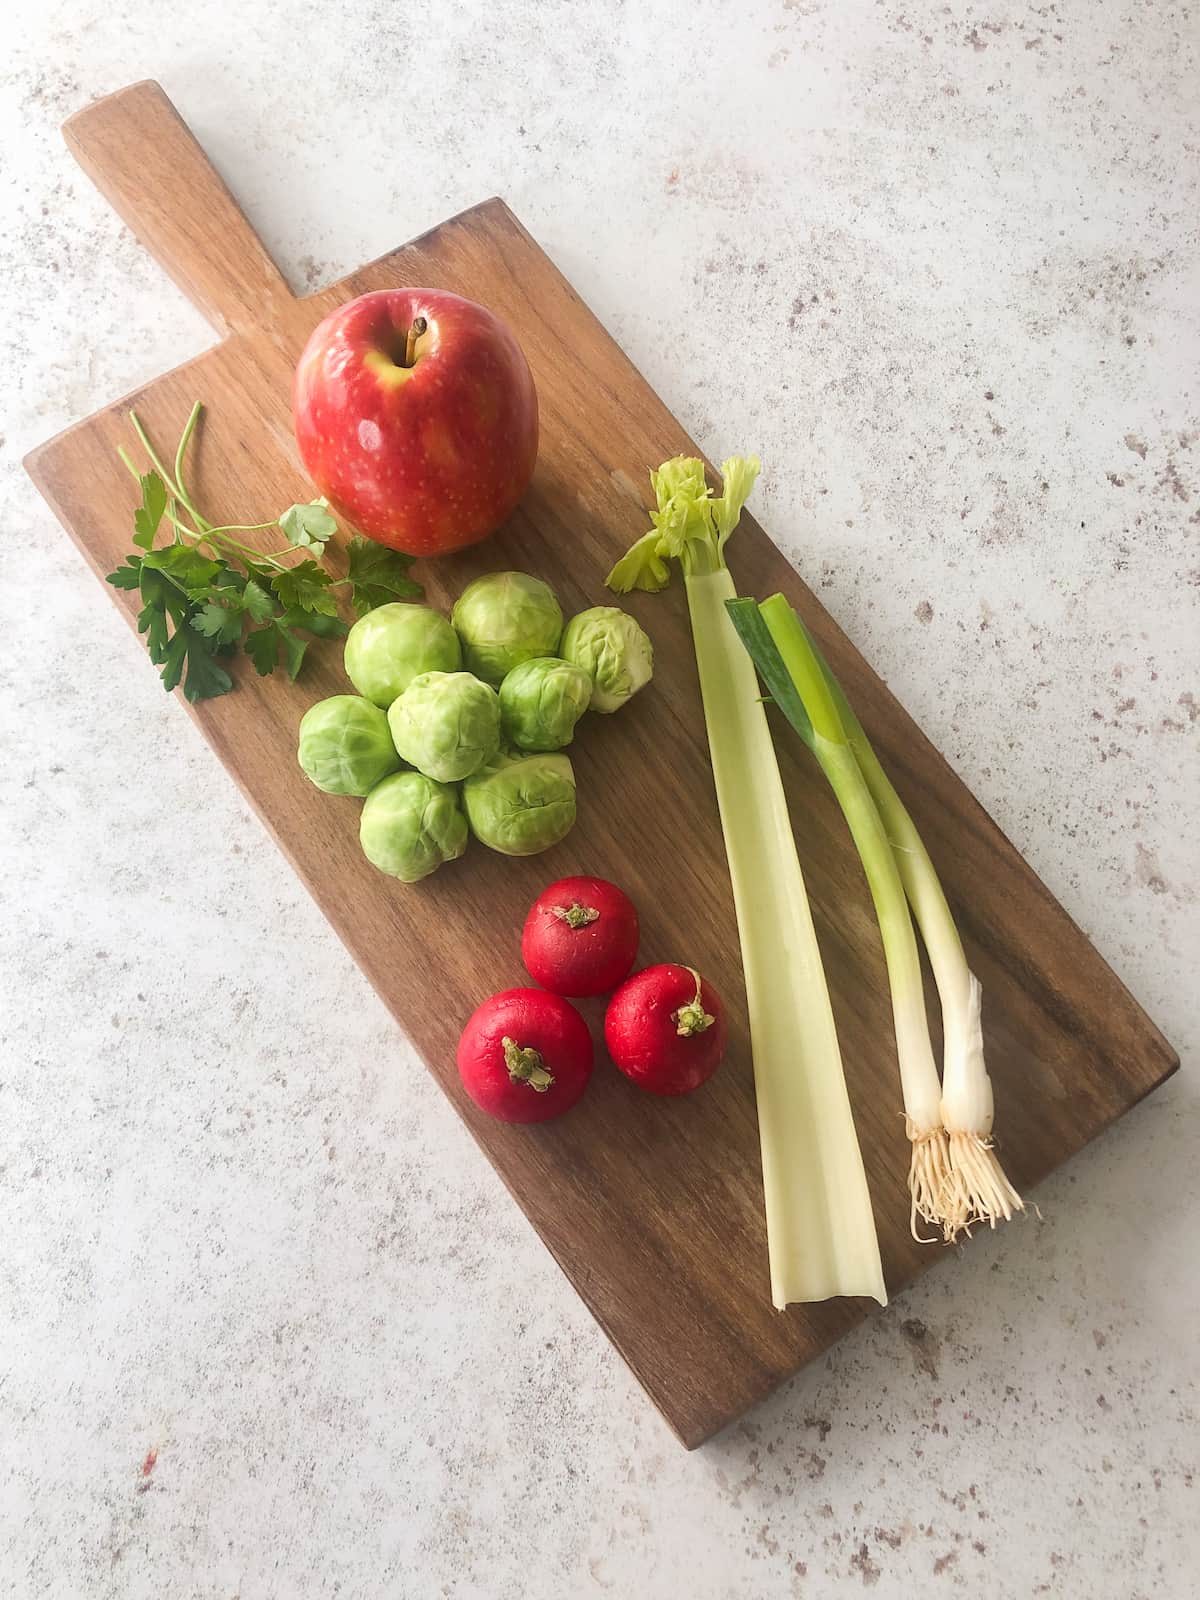 Sprout and apple slaw recipe ingredients set onto a wooden board.